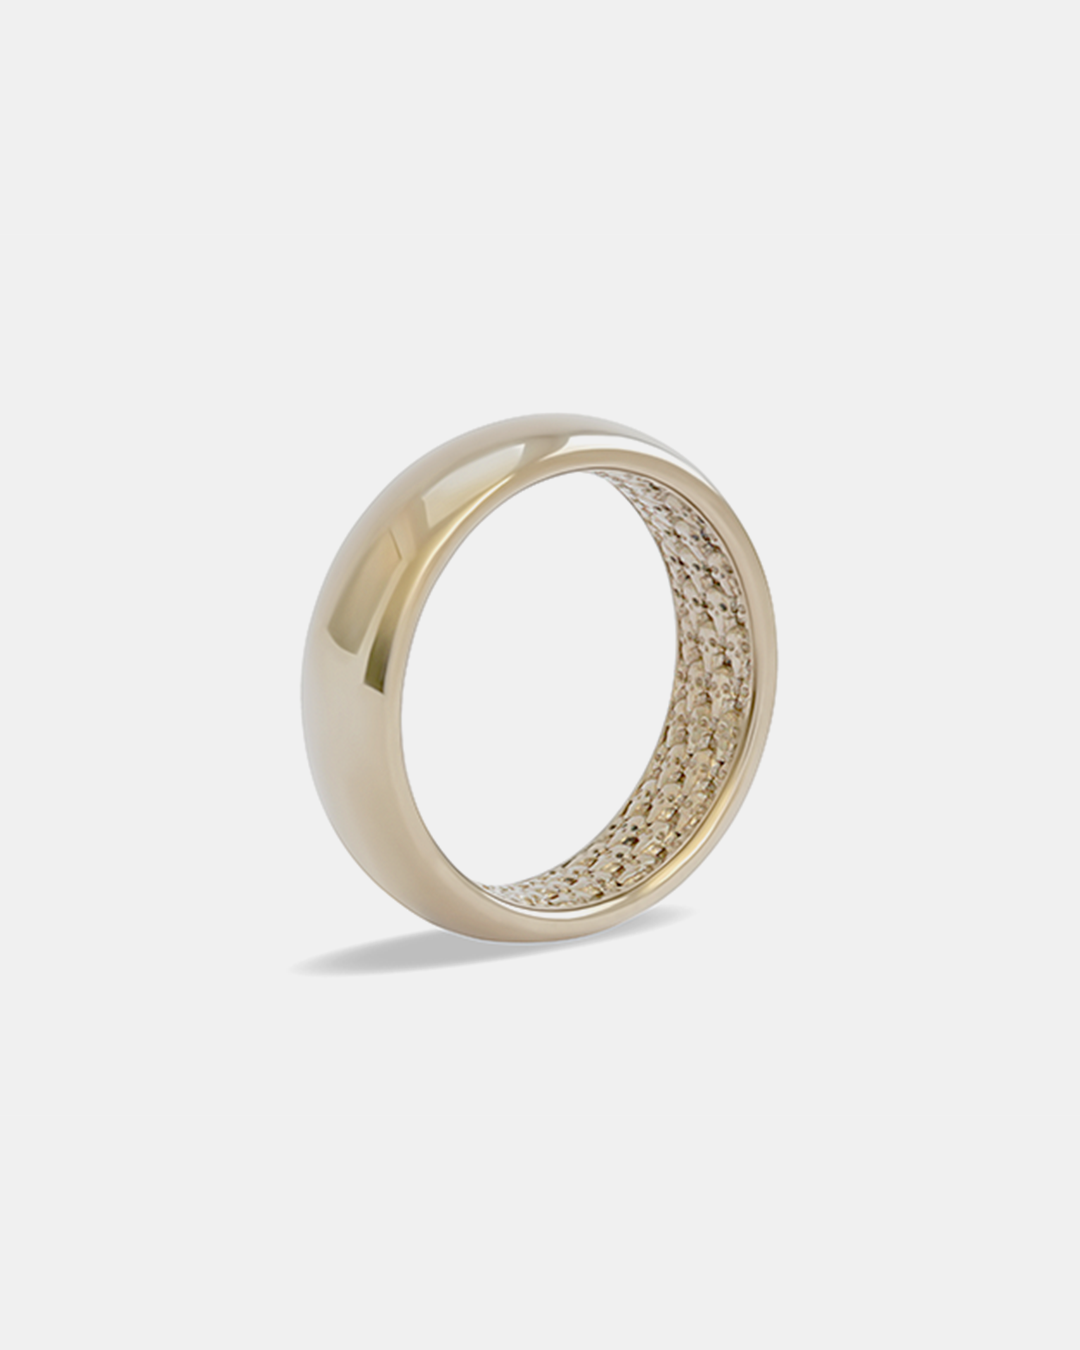 Catacombs of Love / 6mm By fitzgerald jewelry